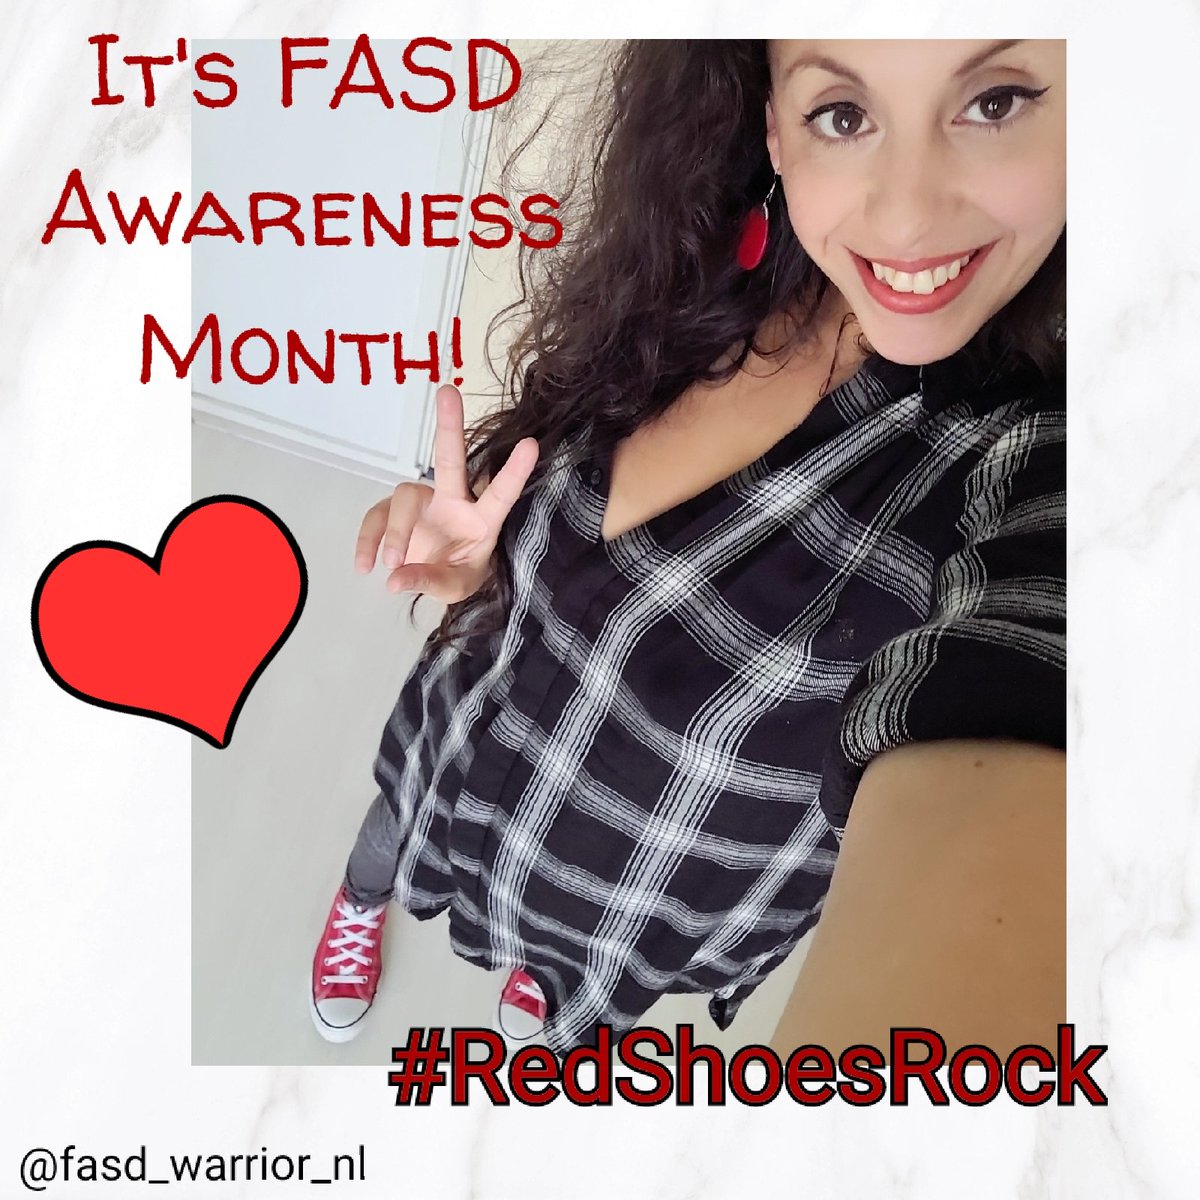 Happy FASD Awareness Month! Help spread awareness, love add peace! ❤️✌🏼#endthestigma #donthateeducate #respectfullconversations #fasd #FASDAwarenessMonth #advocacy #researchers #like #RetweetPlease #nosafeamount #hiddendisability #pregnancy #neurodiversity #inclusion